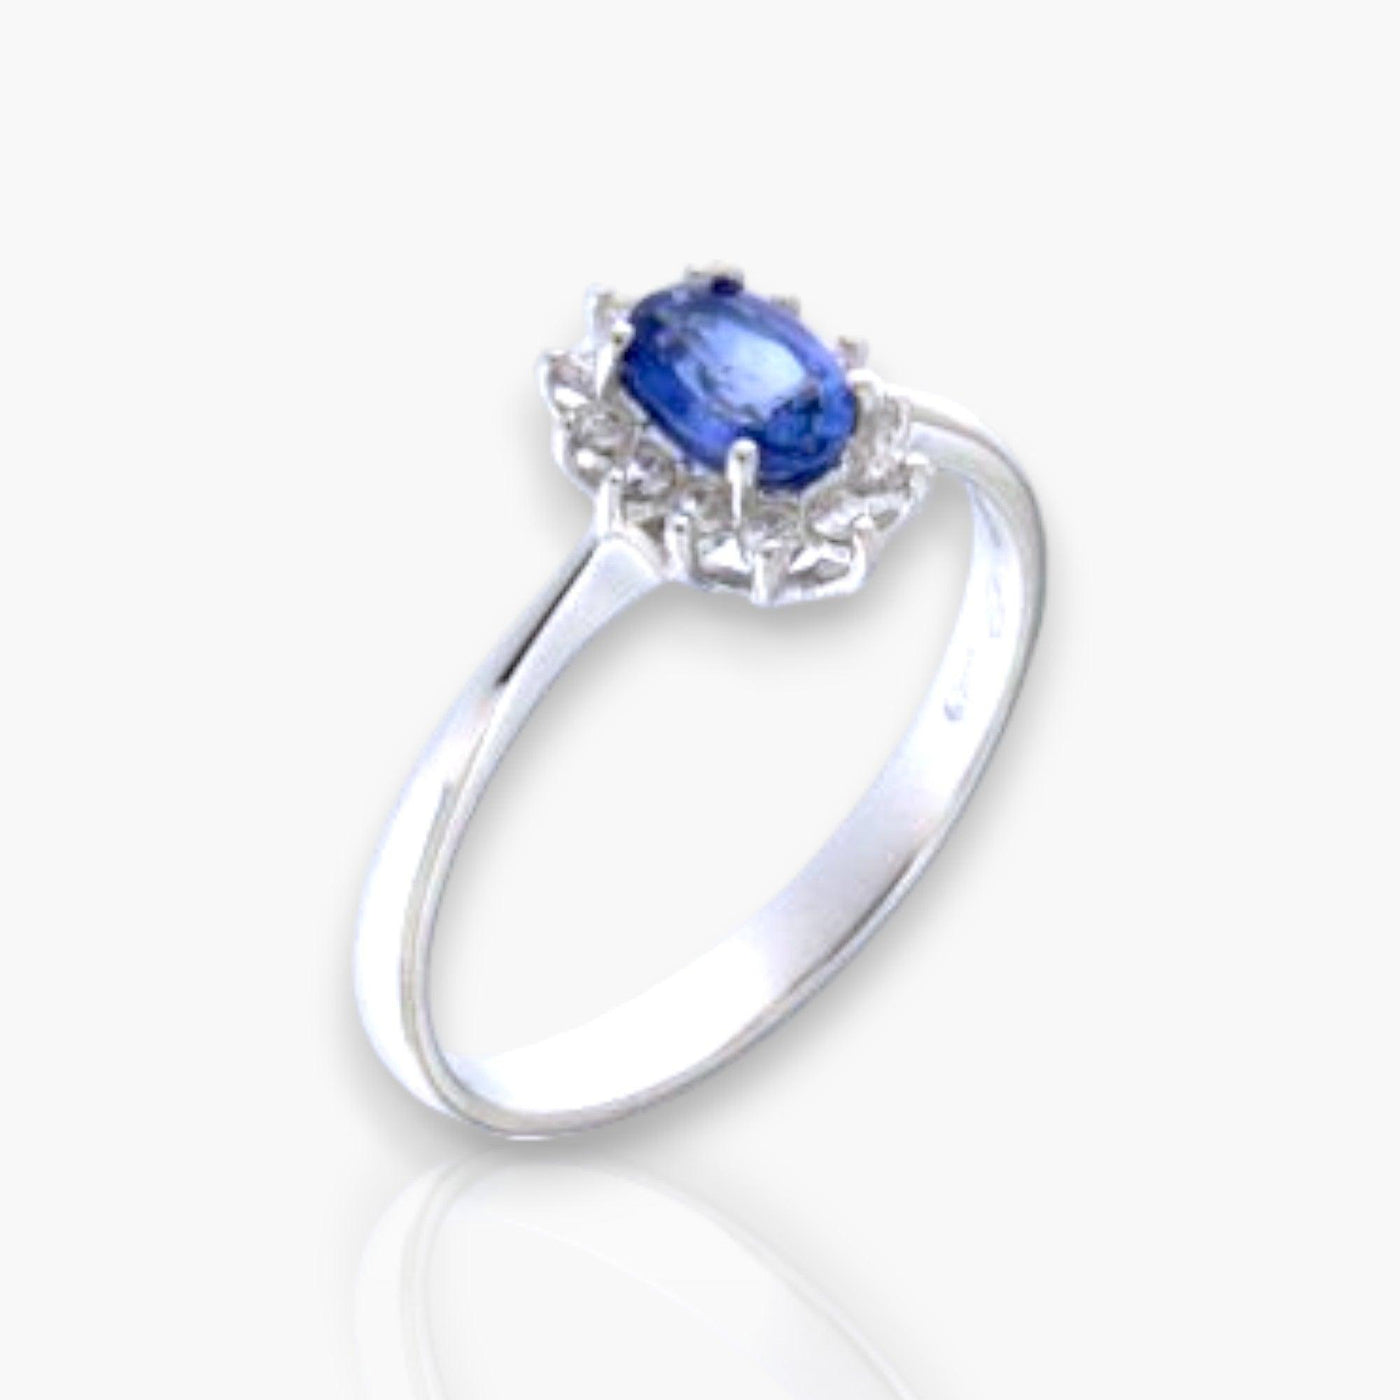 Oval Sapphire Ring with Diamonds (in 4 sizes: 0.20ct - 1.19ct) - Moregola Fine Jewelry